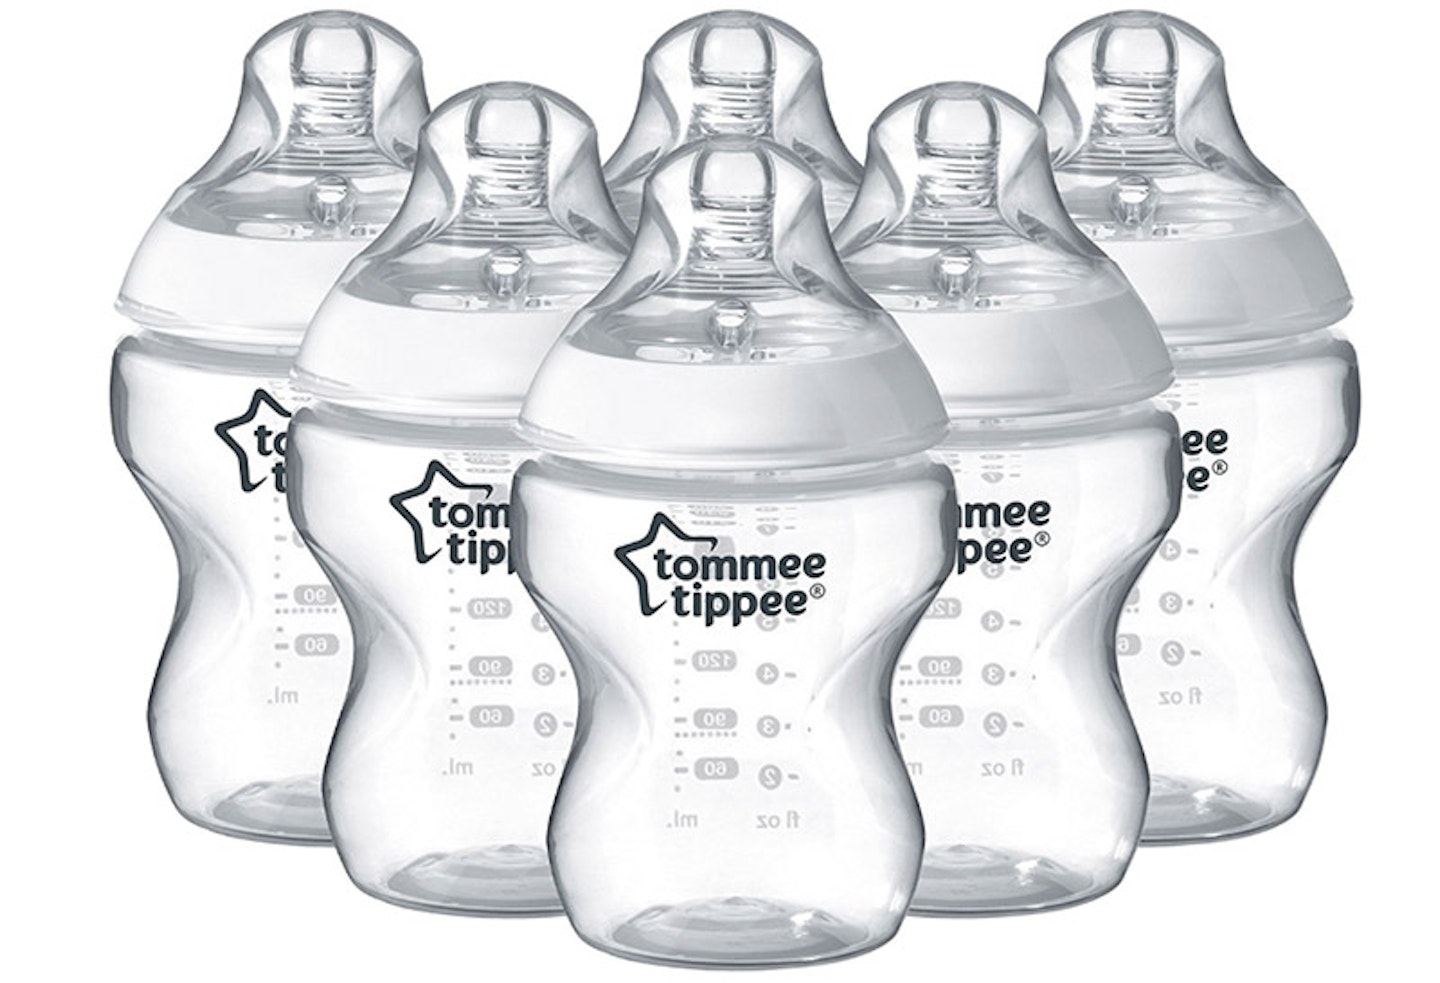 https://images.bauerhosting.com/affiliates/sites/12/motherandbaby/legacy/root/tommee-tippee-closer-nature-feeding-bottles.jpg?ar=16%3A9&fit=crop&crop=top&auto=format&w=1440&q=80